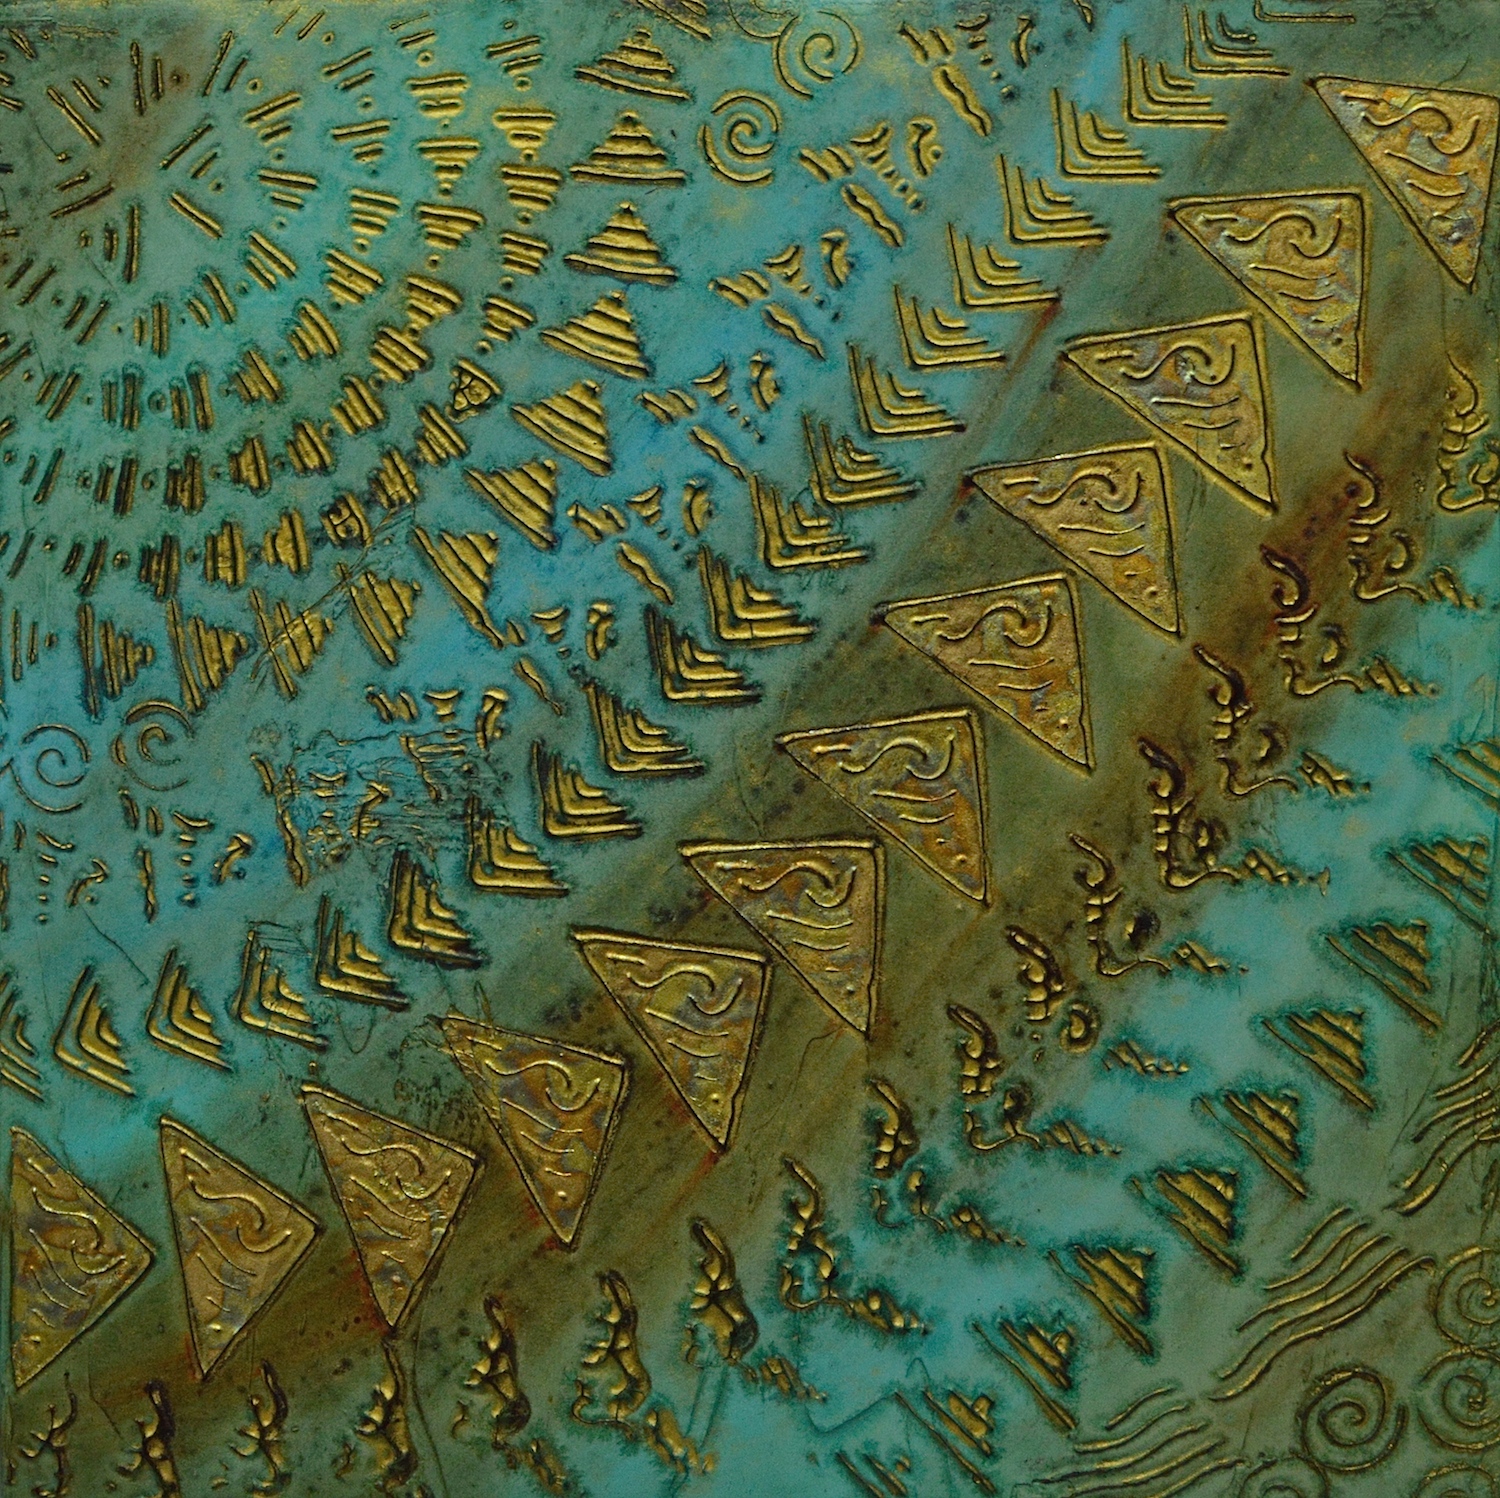 A Four Part Brief on Coral Reef # 1 of 4 @ 12" x 12' x 2" Acrylic, oil & gold leaf on archival board